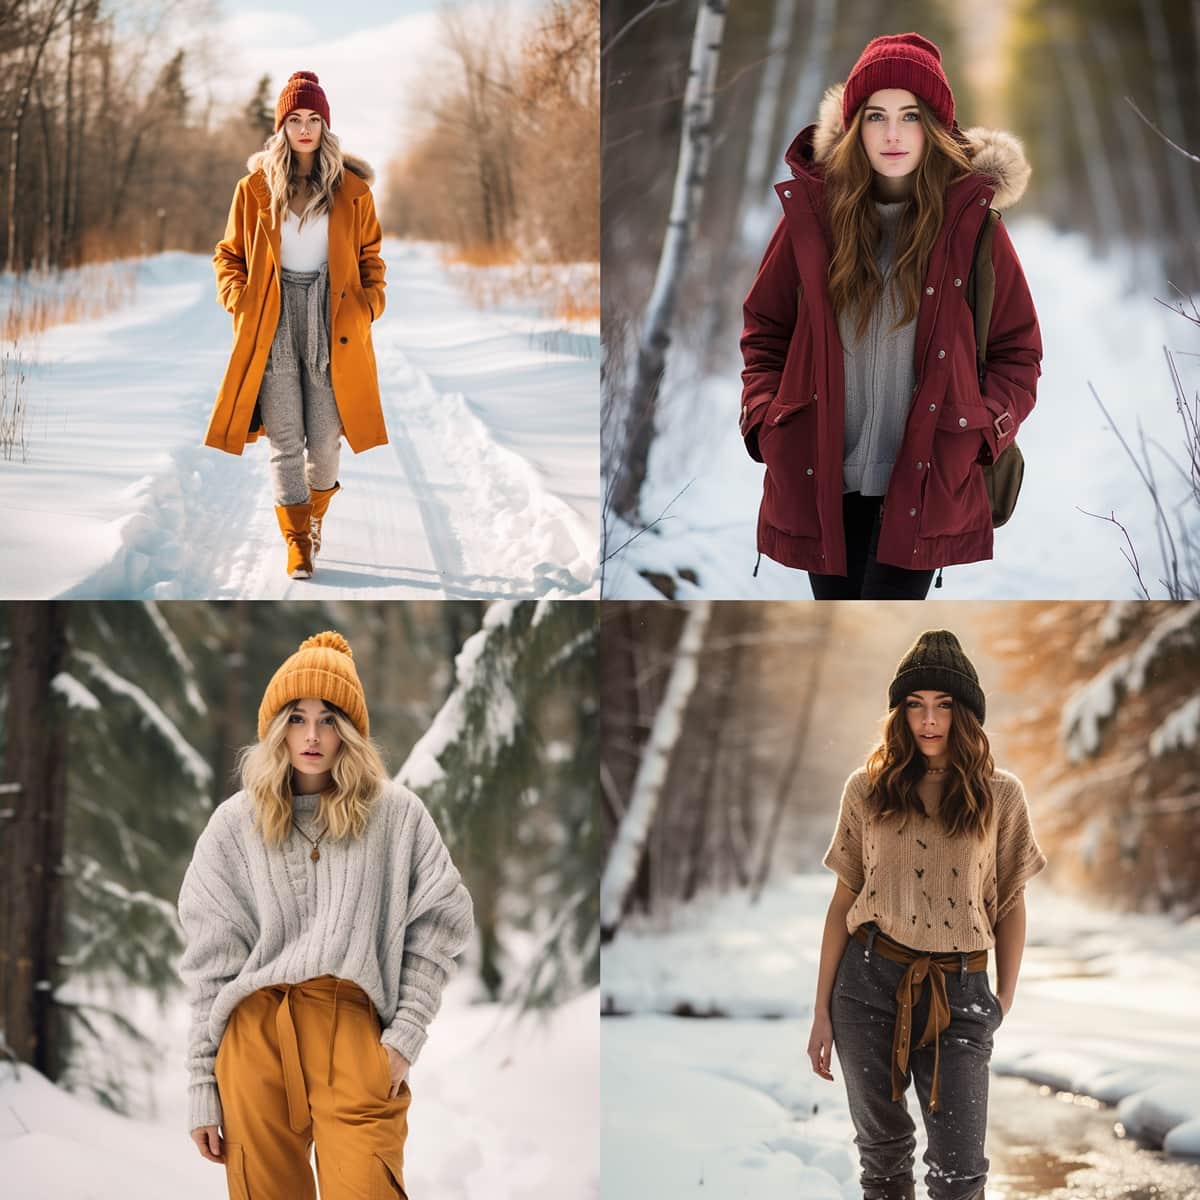 Canadian fashion brands are famous for their blend of innovative design, sustainable practices, and high-quality craftsmanship, providing stylish and durable clothing and footwear suitable for harsh winter conditions